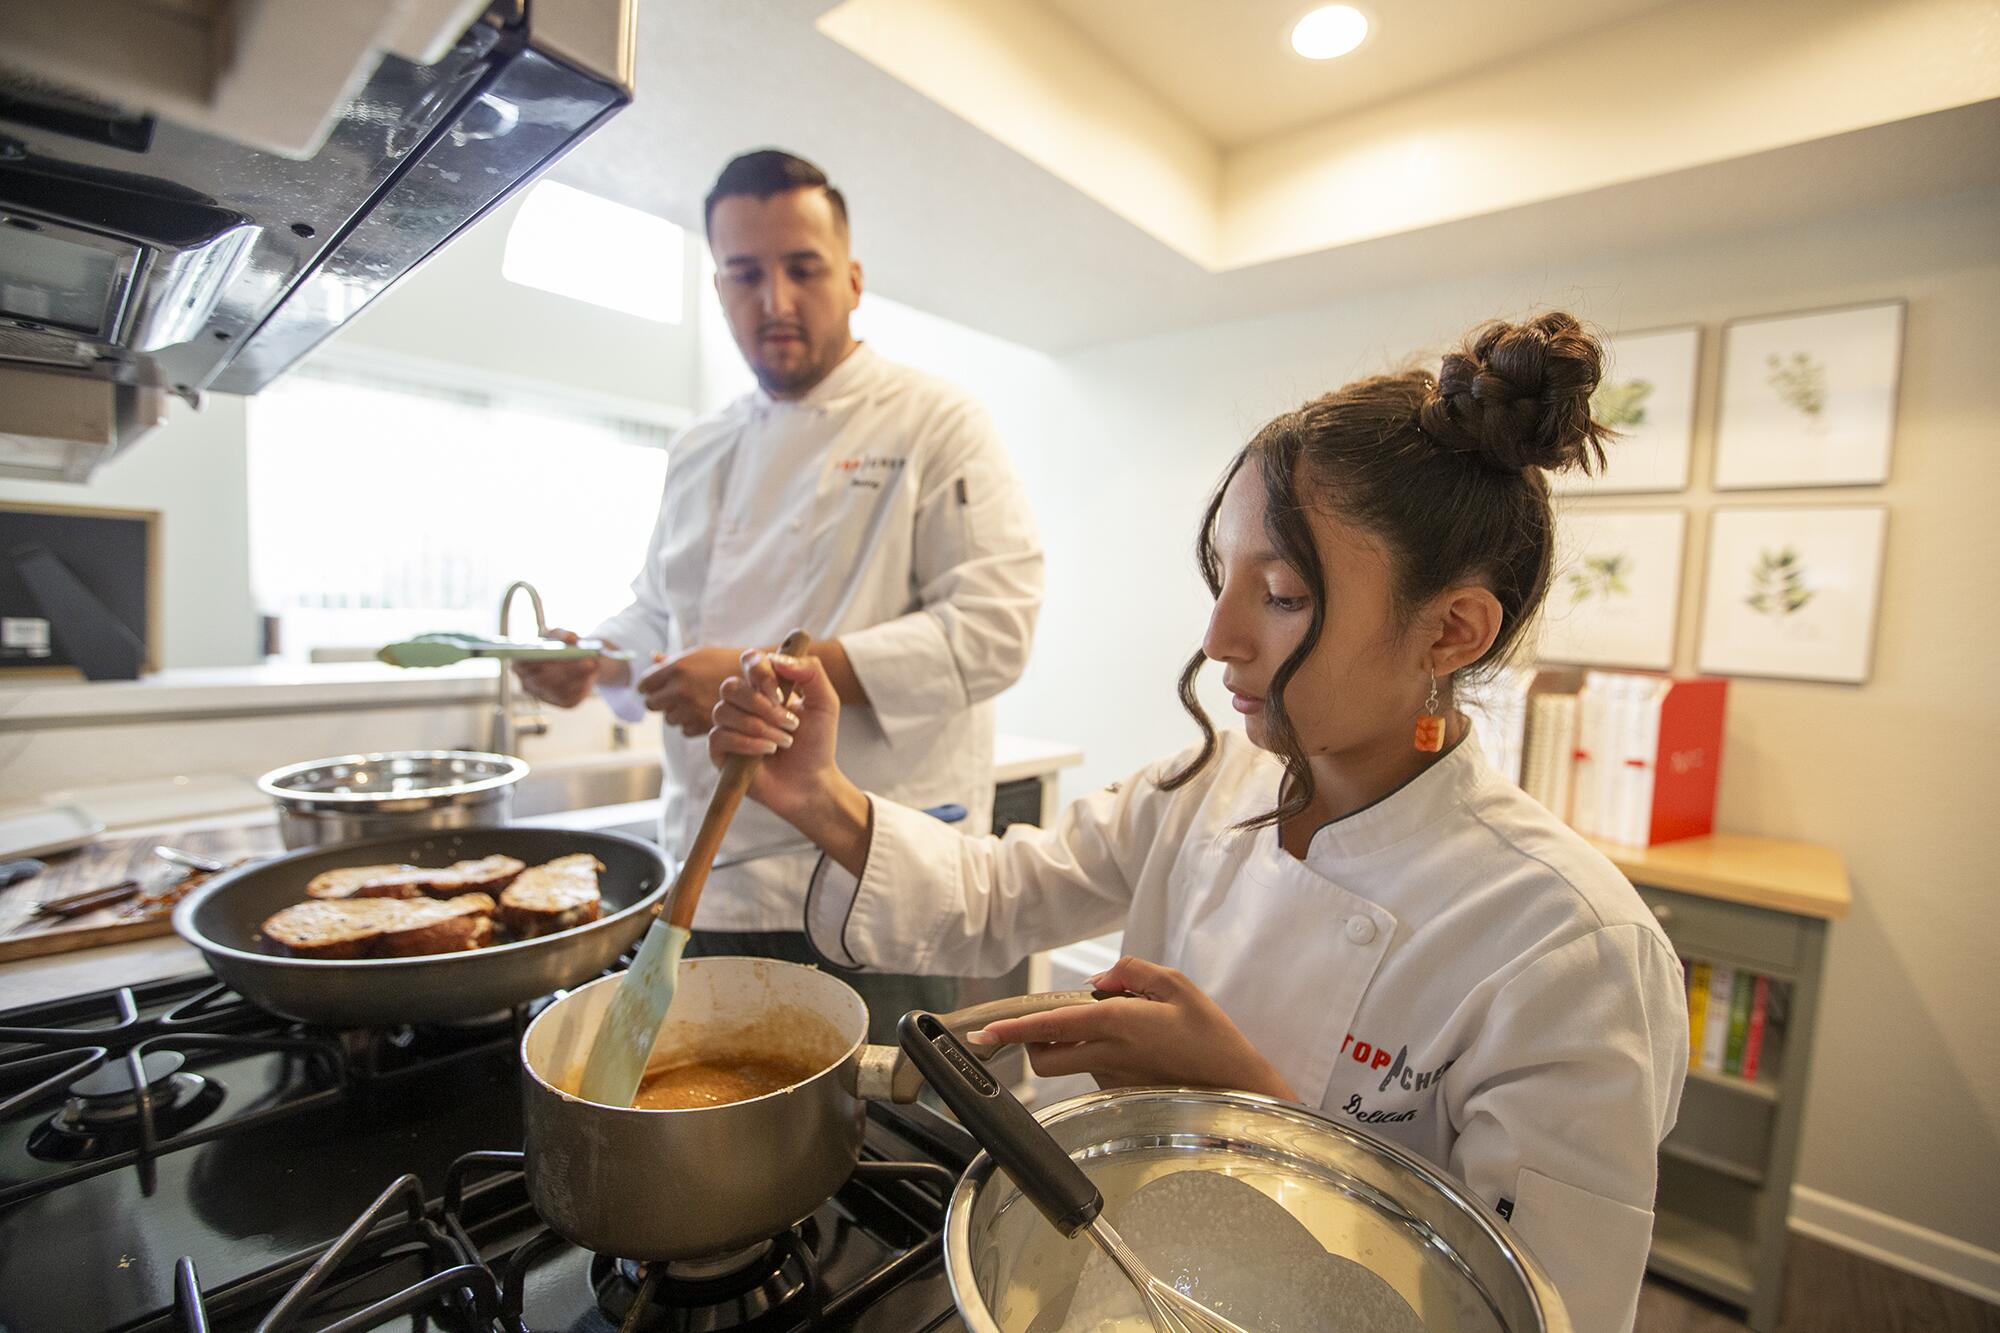 Delilah Flores and her Uncle Danny Flores prepare stuffed French toast.